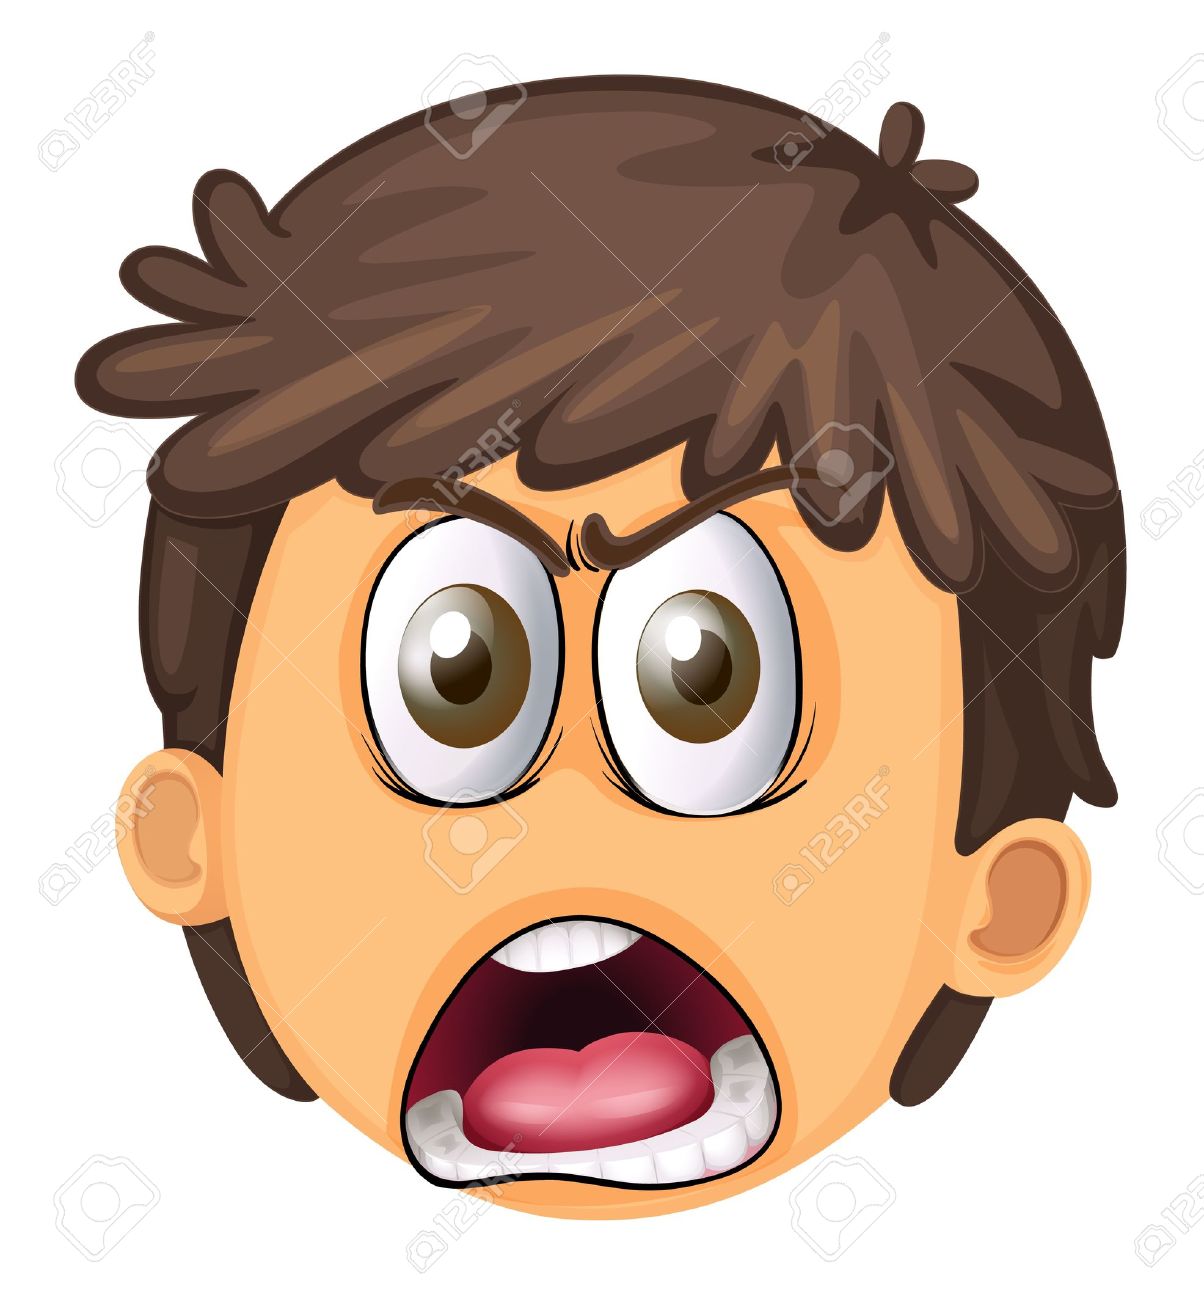 Anger clipart #15, Download drawings